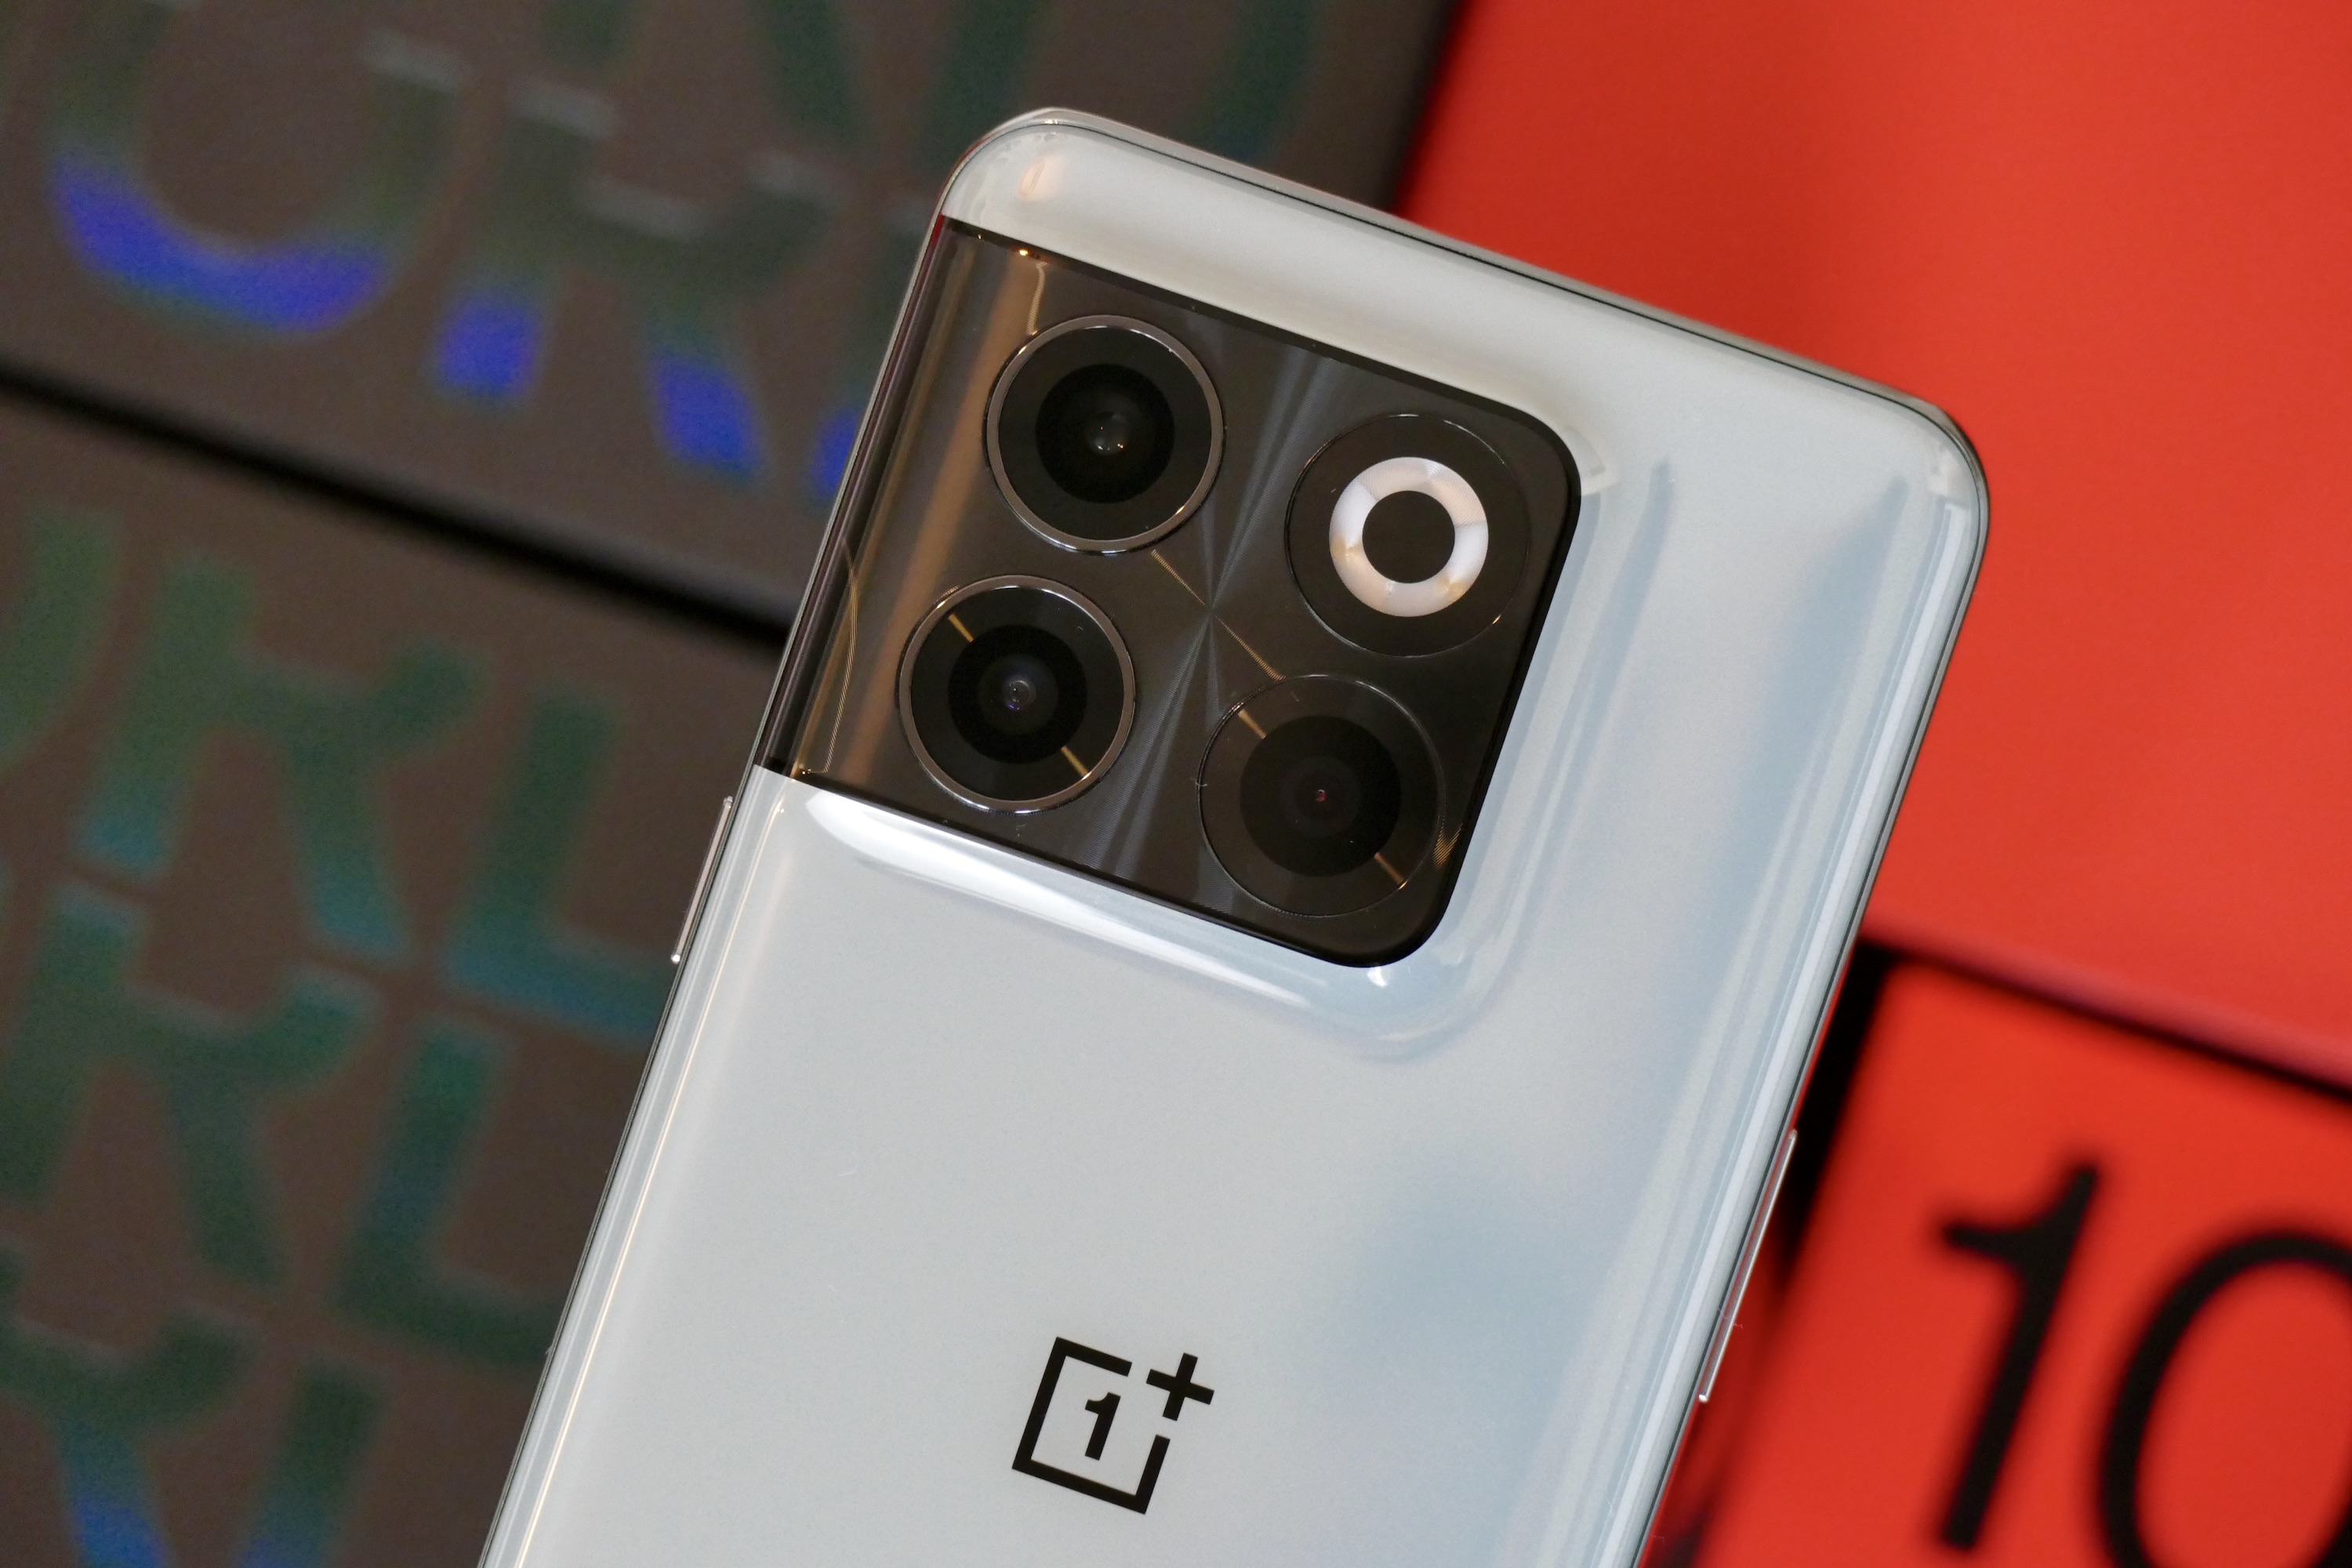 OnePlus confirms launch date of OnePlus 10T 5G - GadgetMatch